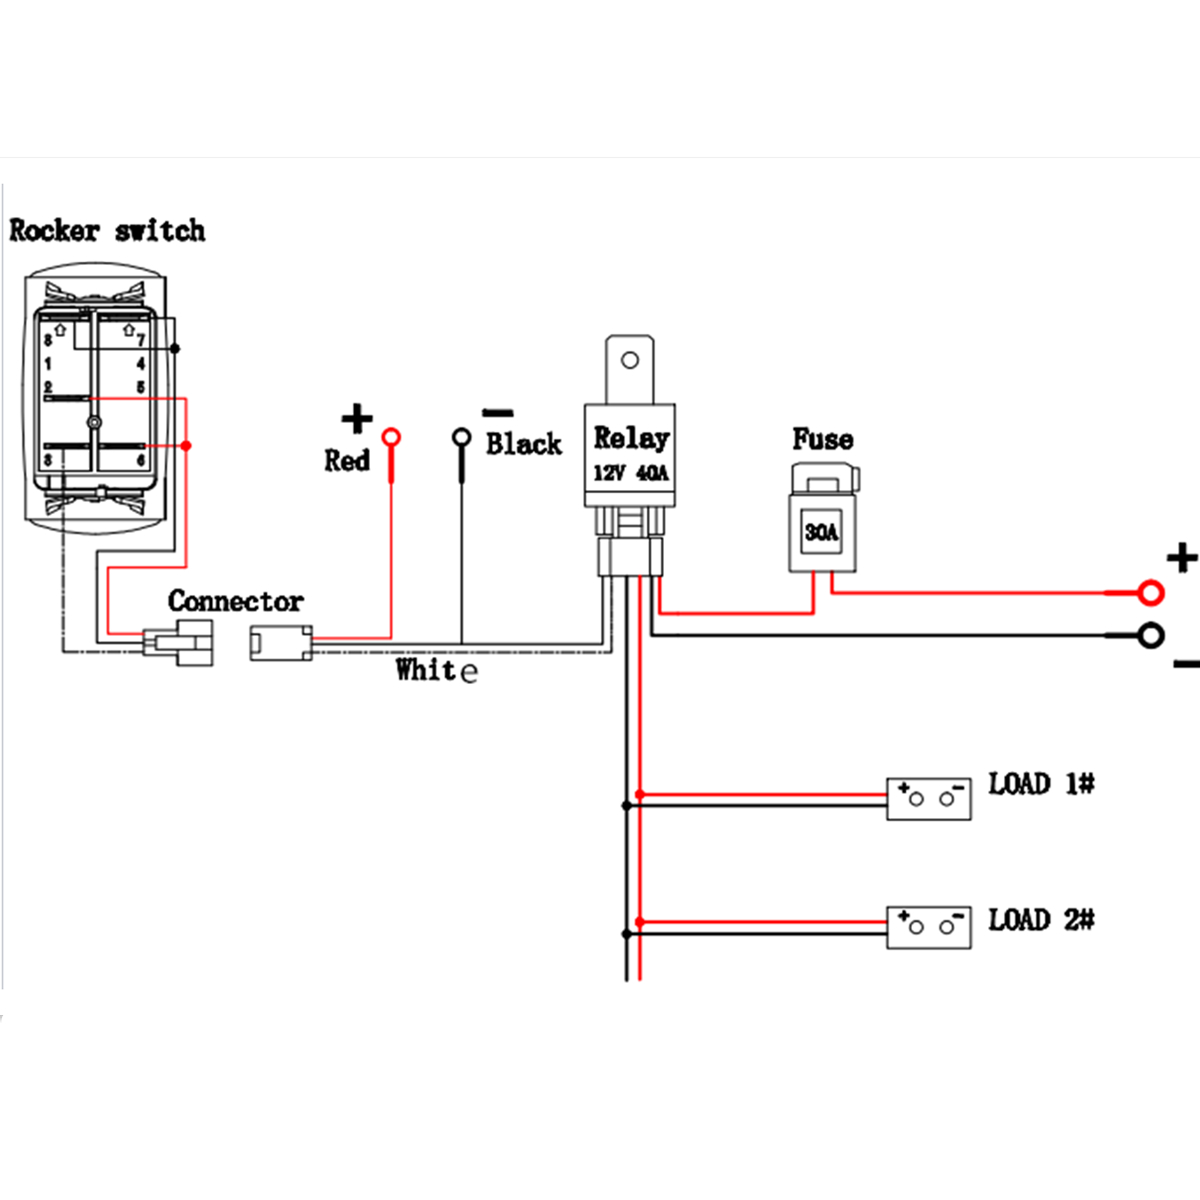 5 Wire Led Diagram | Wiring Diagram - Auto Relay Wiring Diagram